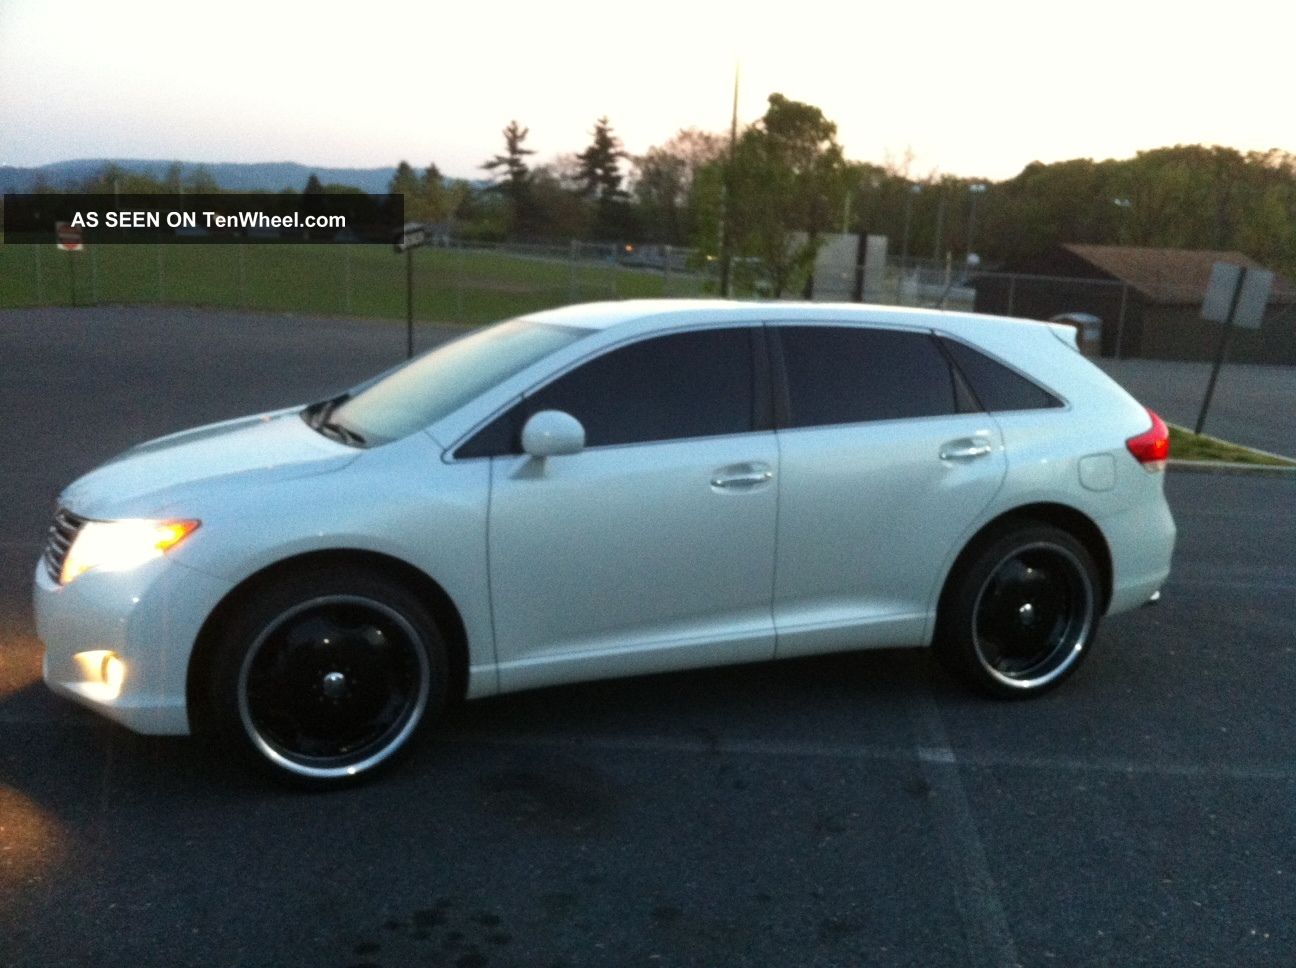 2010 Toyota venza owners manual download